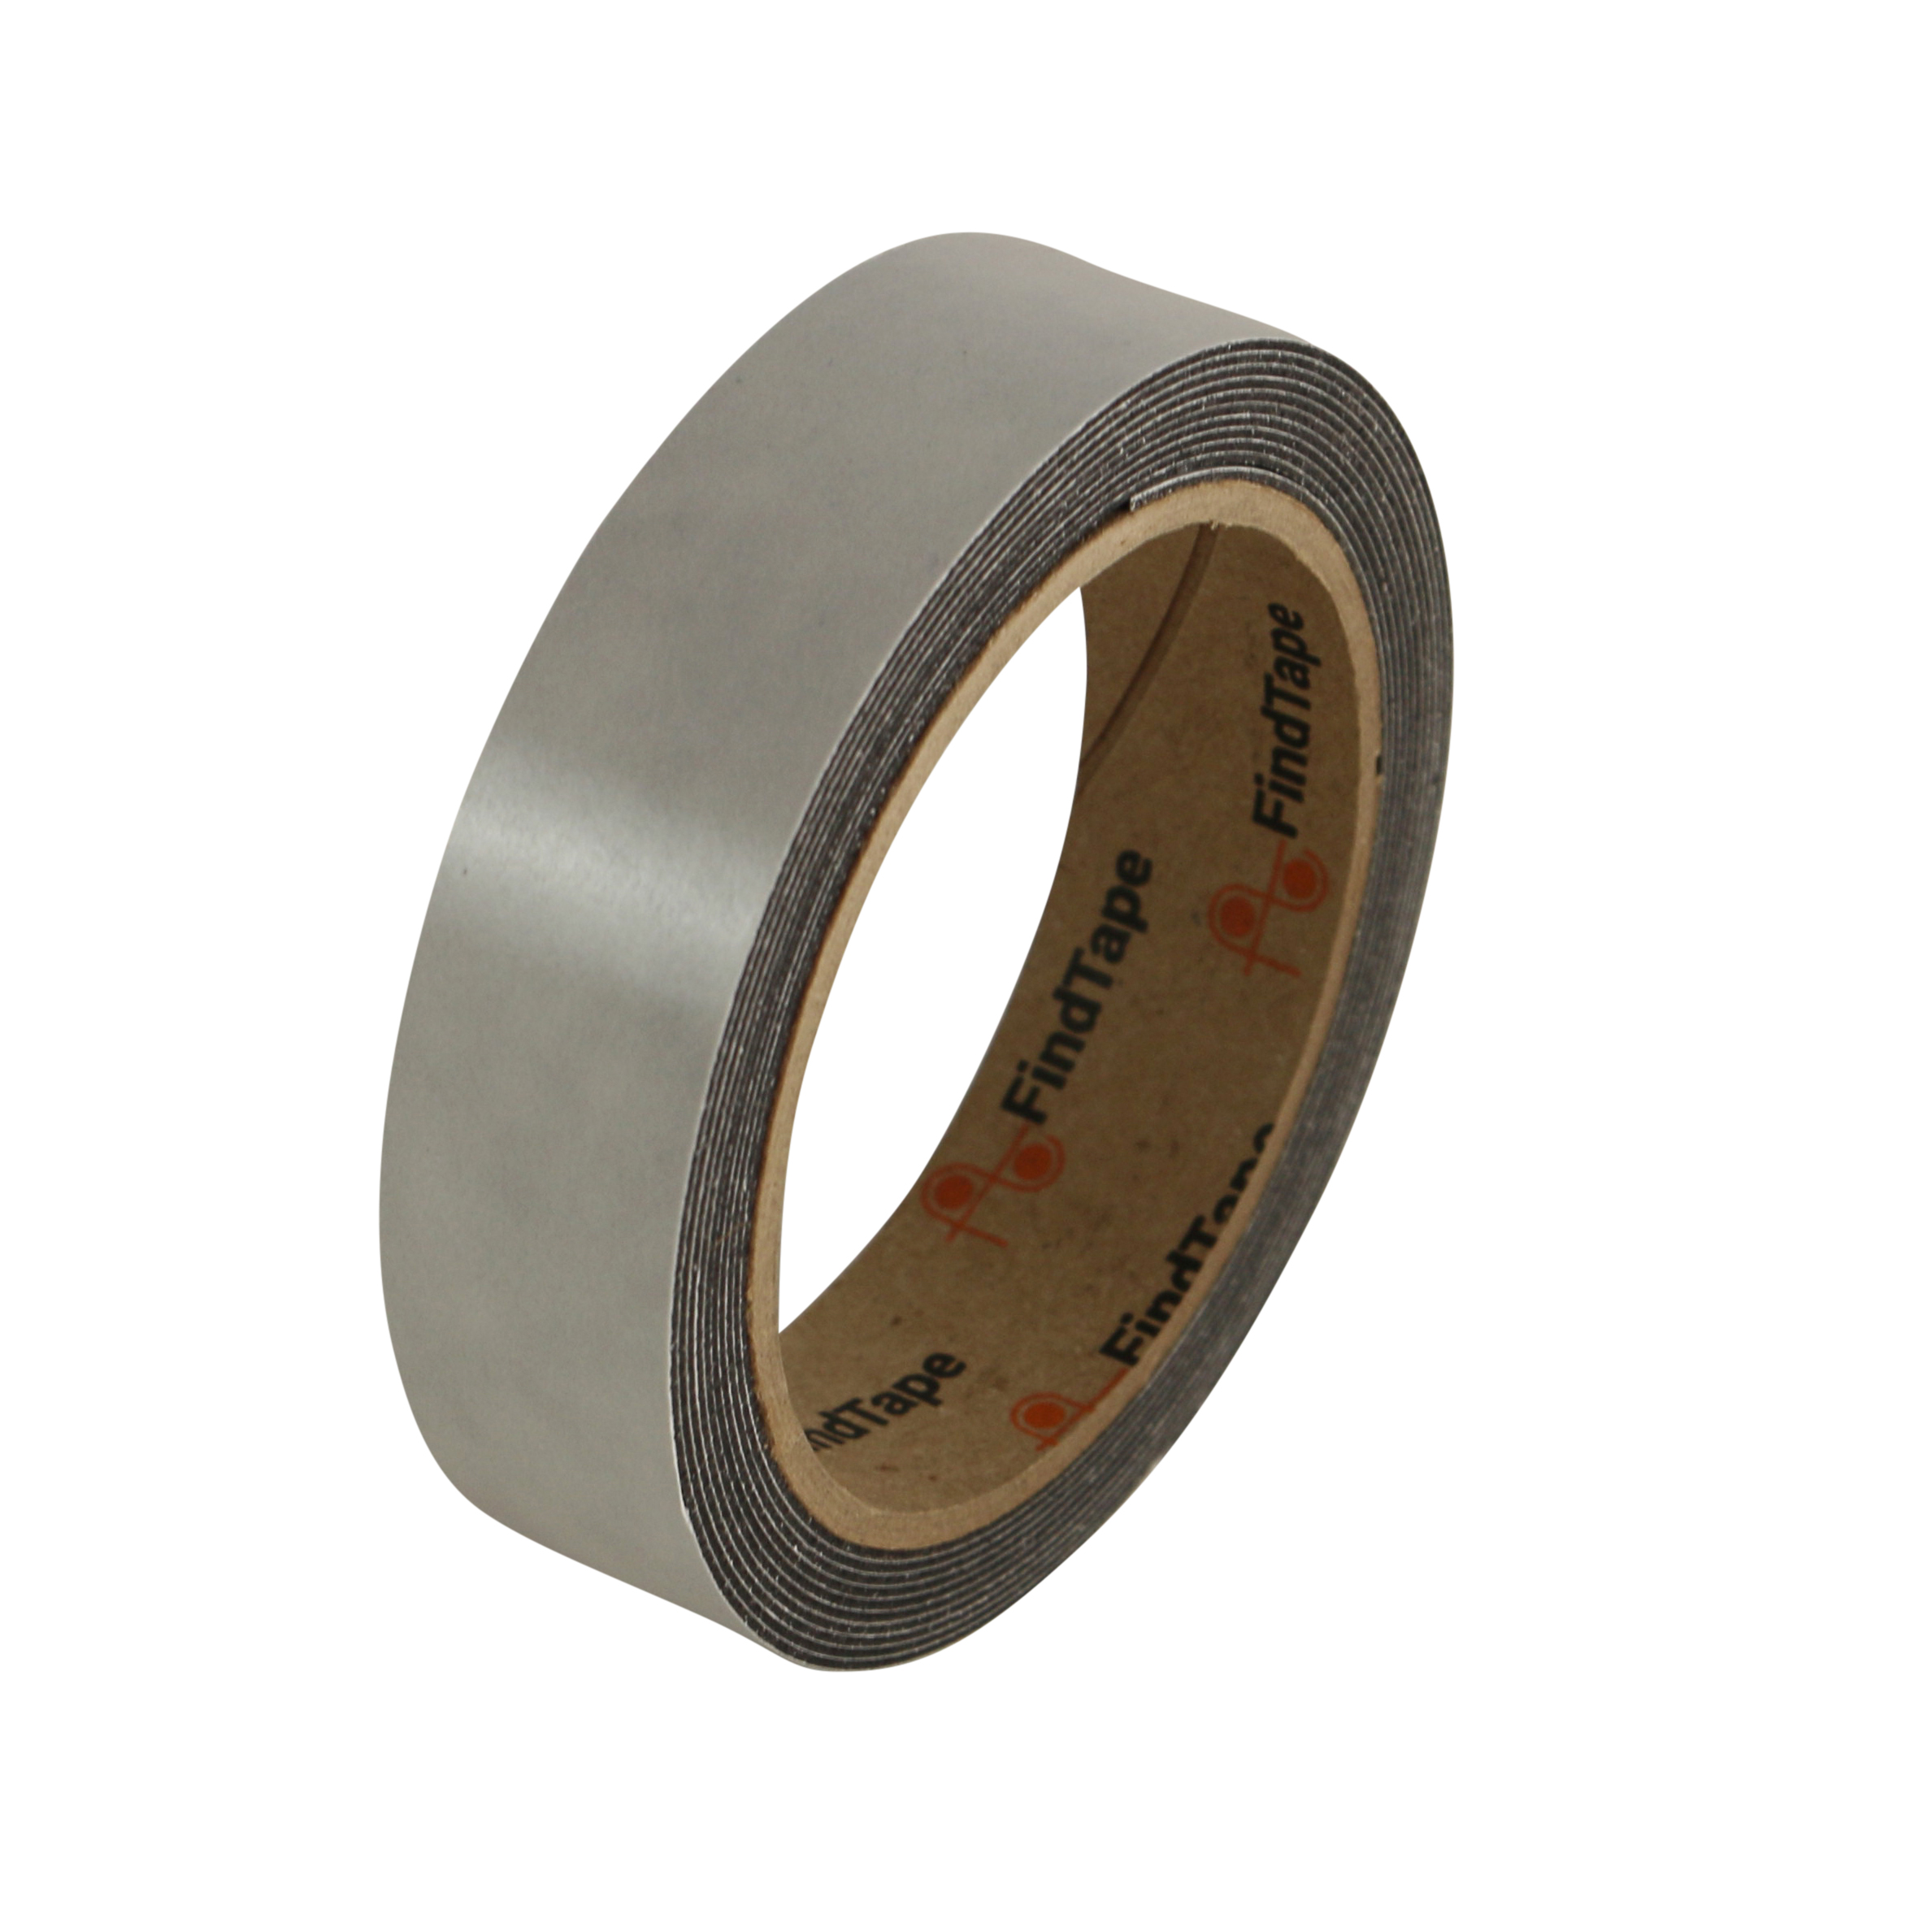 FindTape Receptive Steel Tape [Adhesive-Backed / Attracts Magnets] (MGRS)